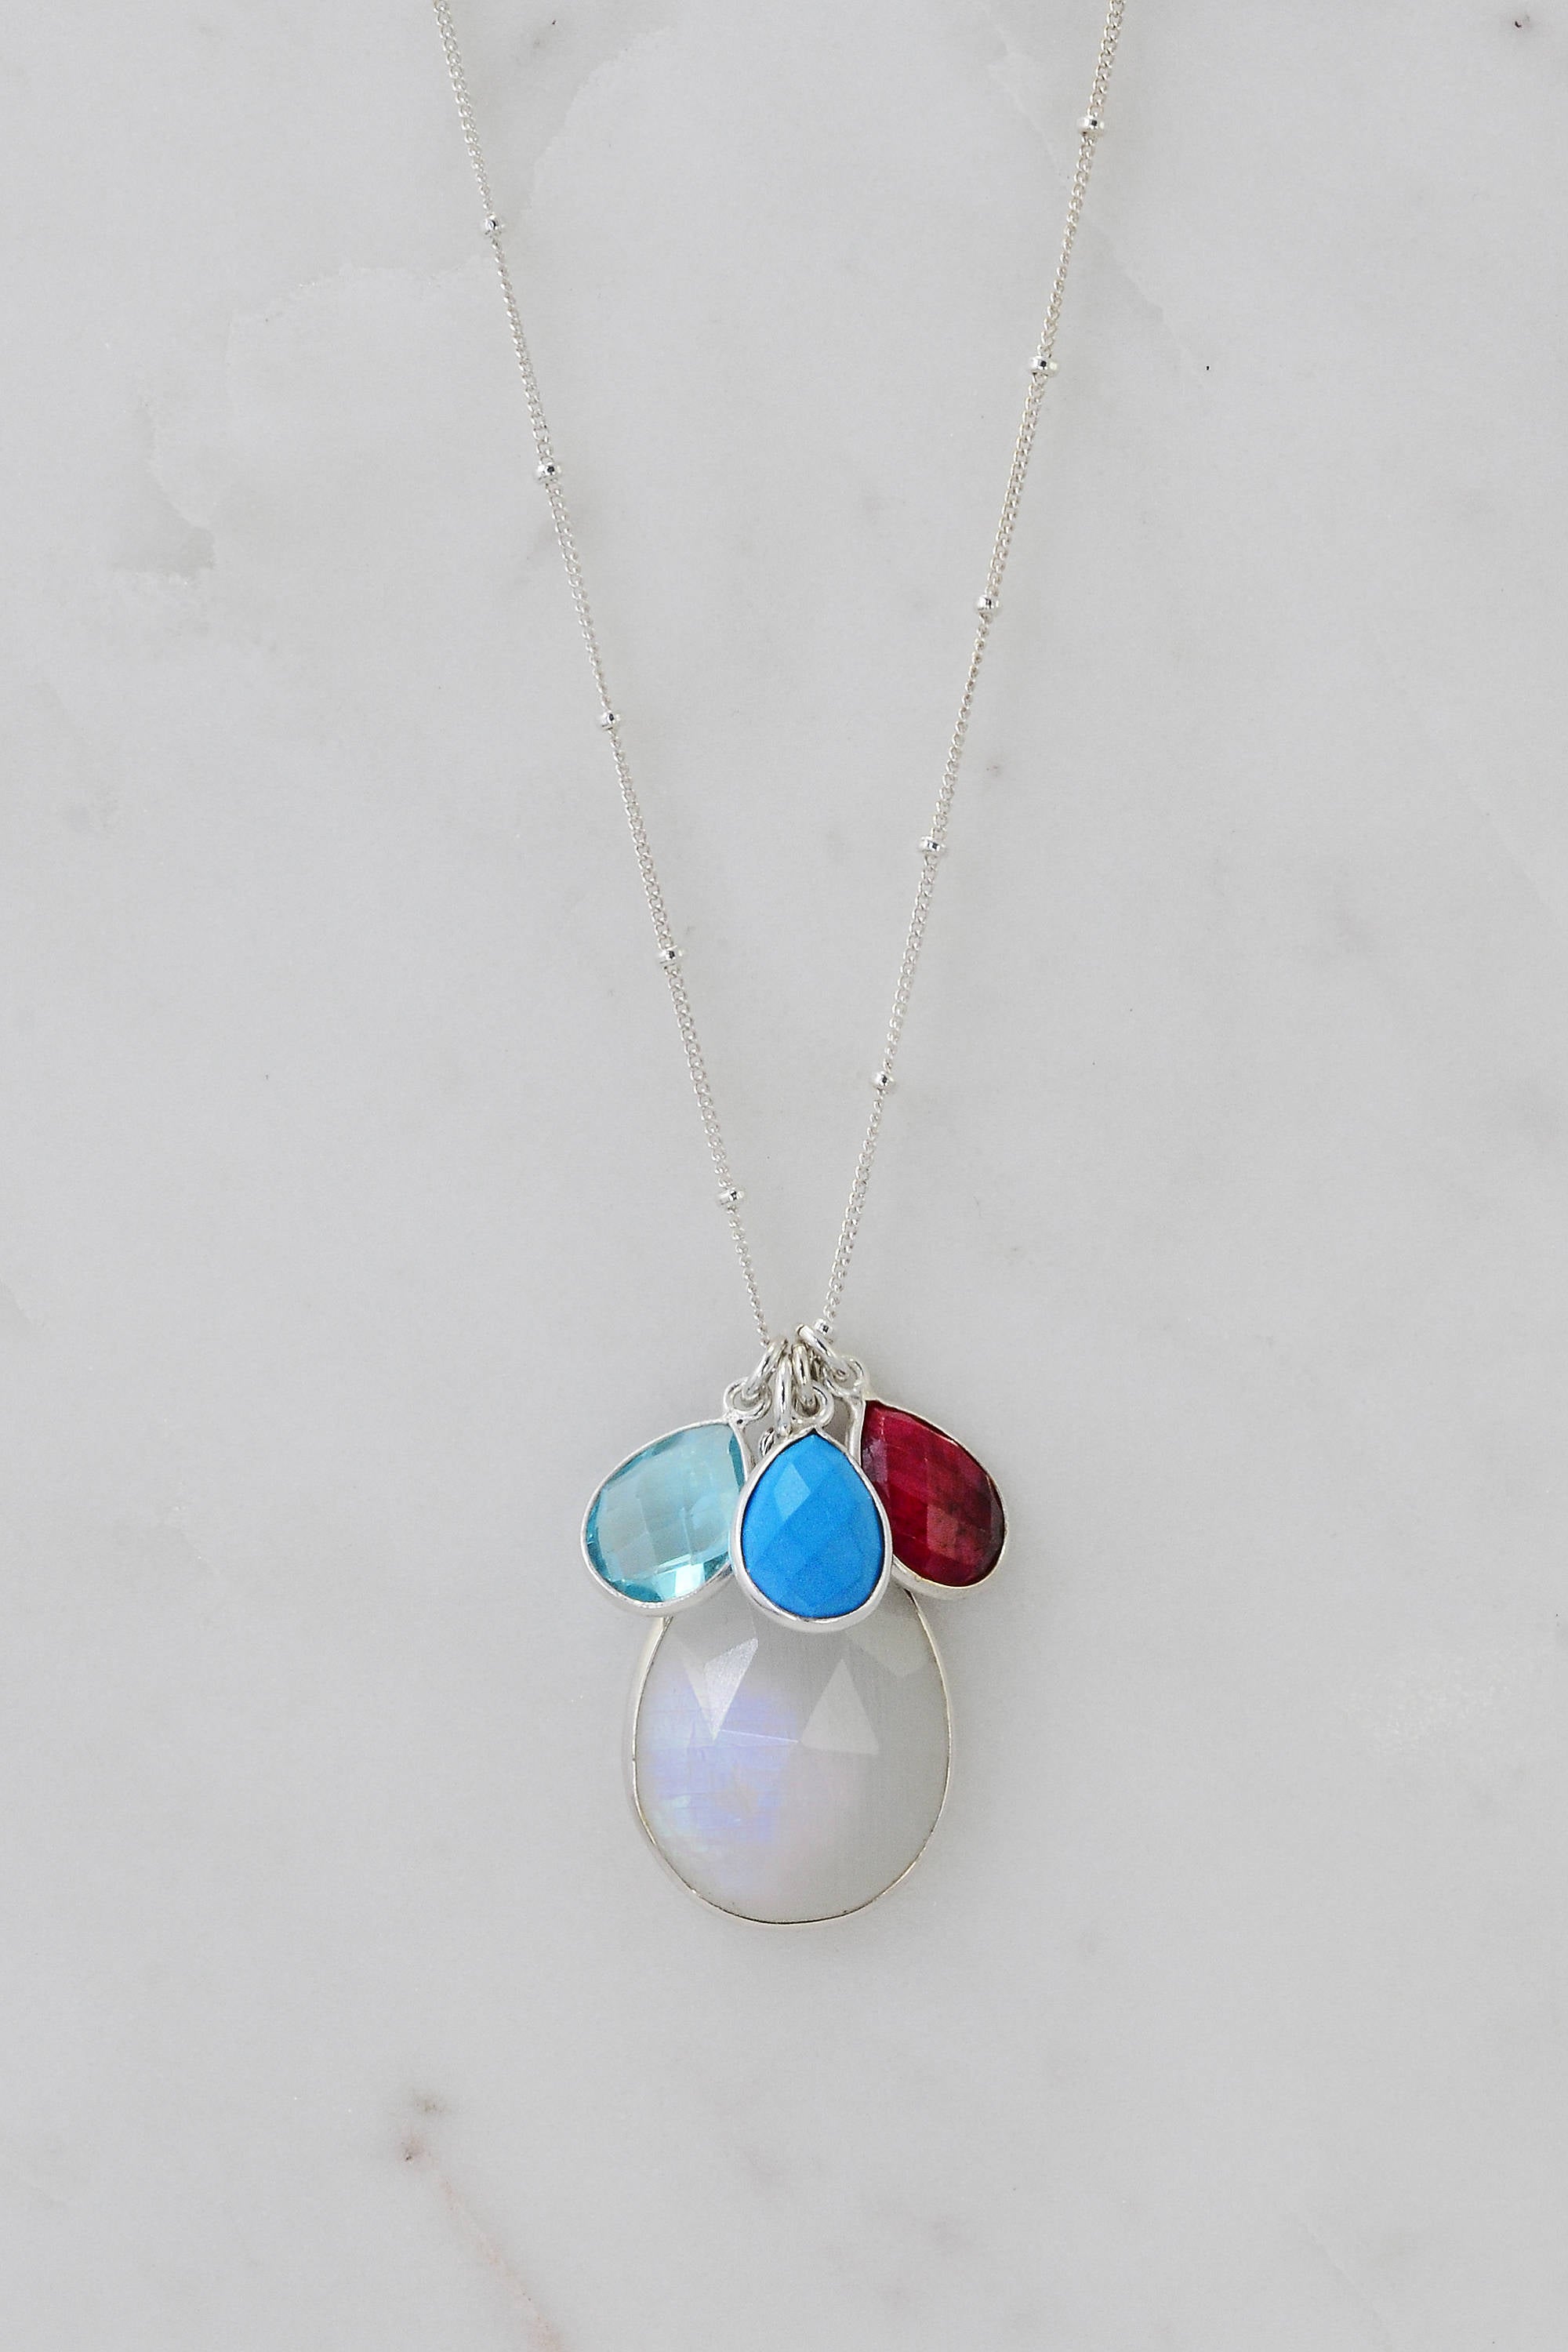 Sterling Silver Birthstone Necklace - Mothers Necklace - Silver Charm Necklace - Tear Drop Necklace - Bezel Set Necklace - Sterling Silver